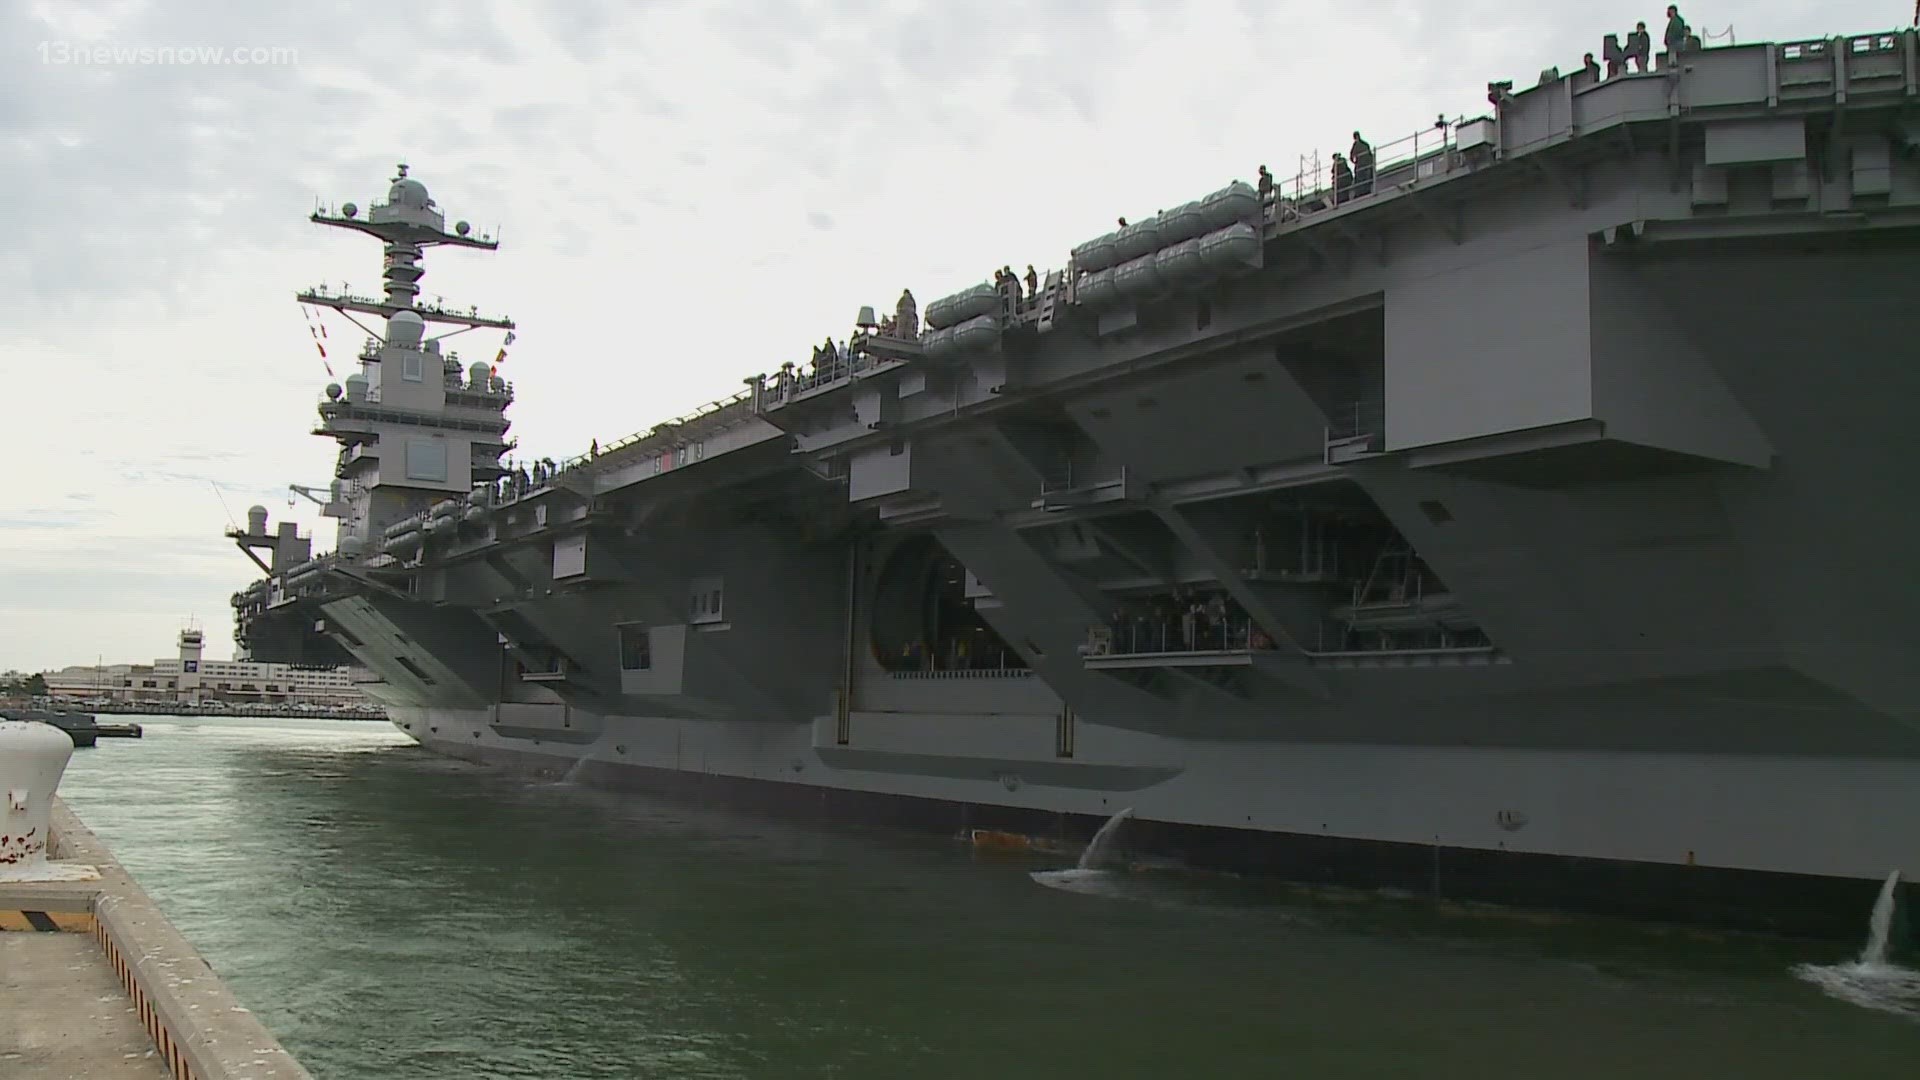 The Norfolk-based USS Gerald R. Ford aircraft carrier strike group is heading home after months of extra duty at sea protecting Israel.